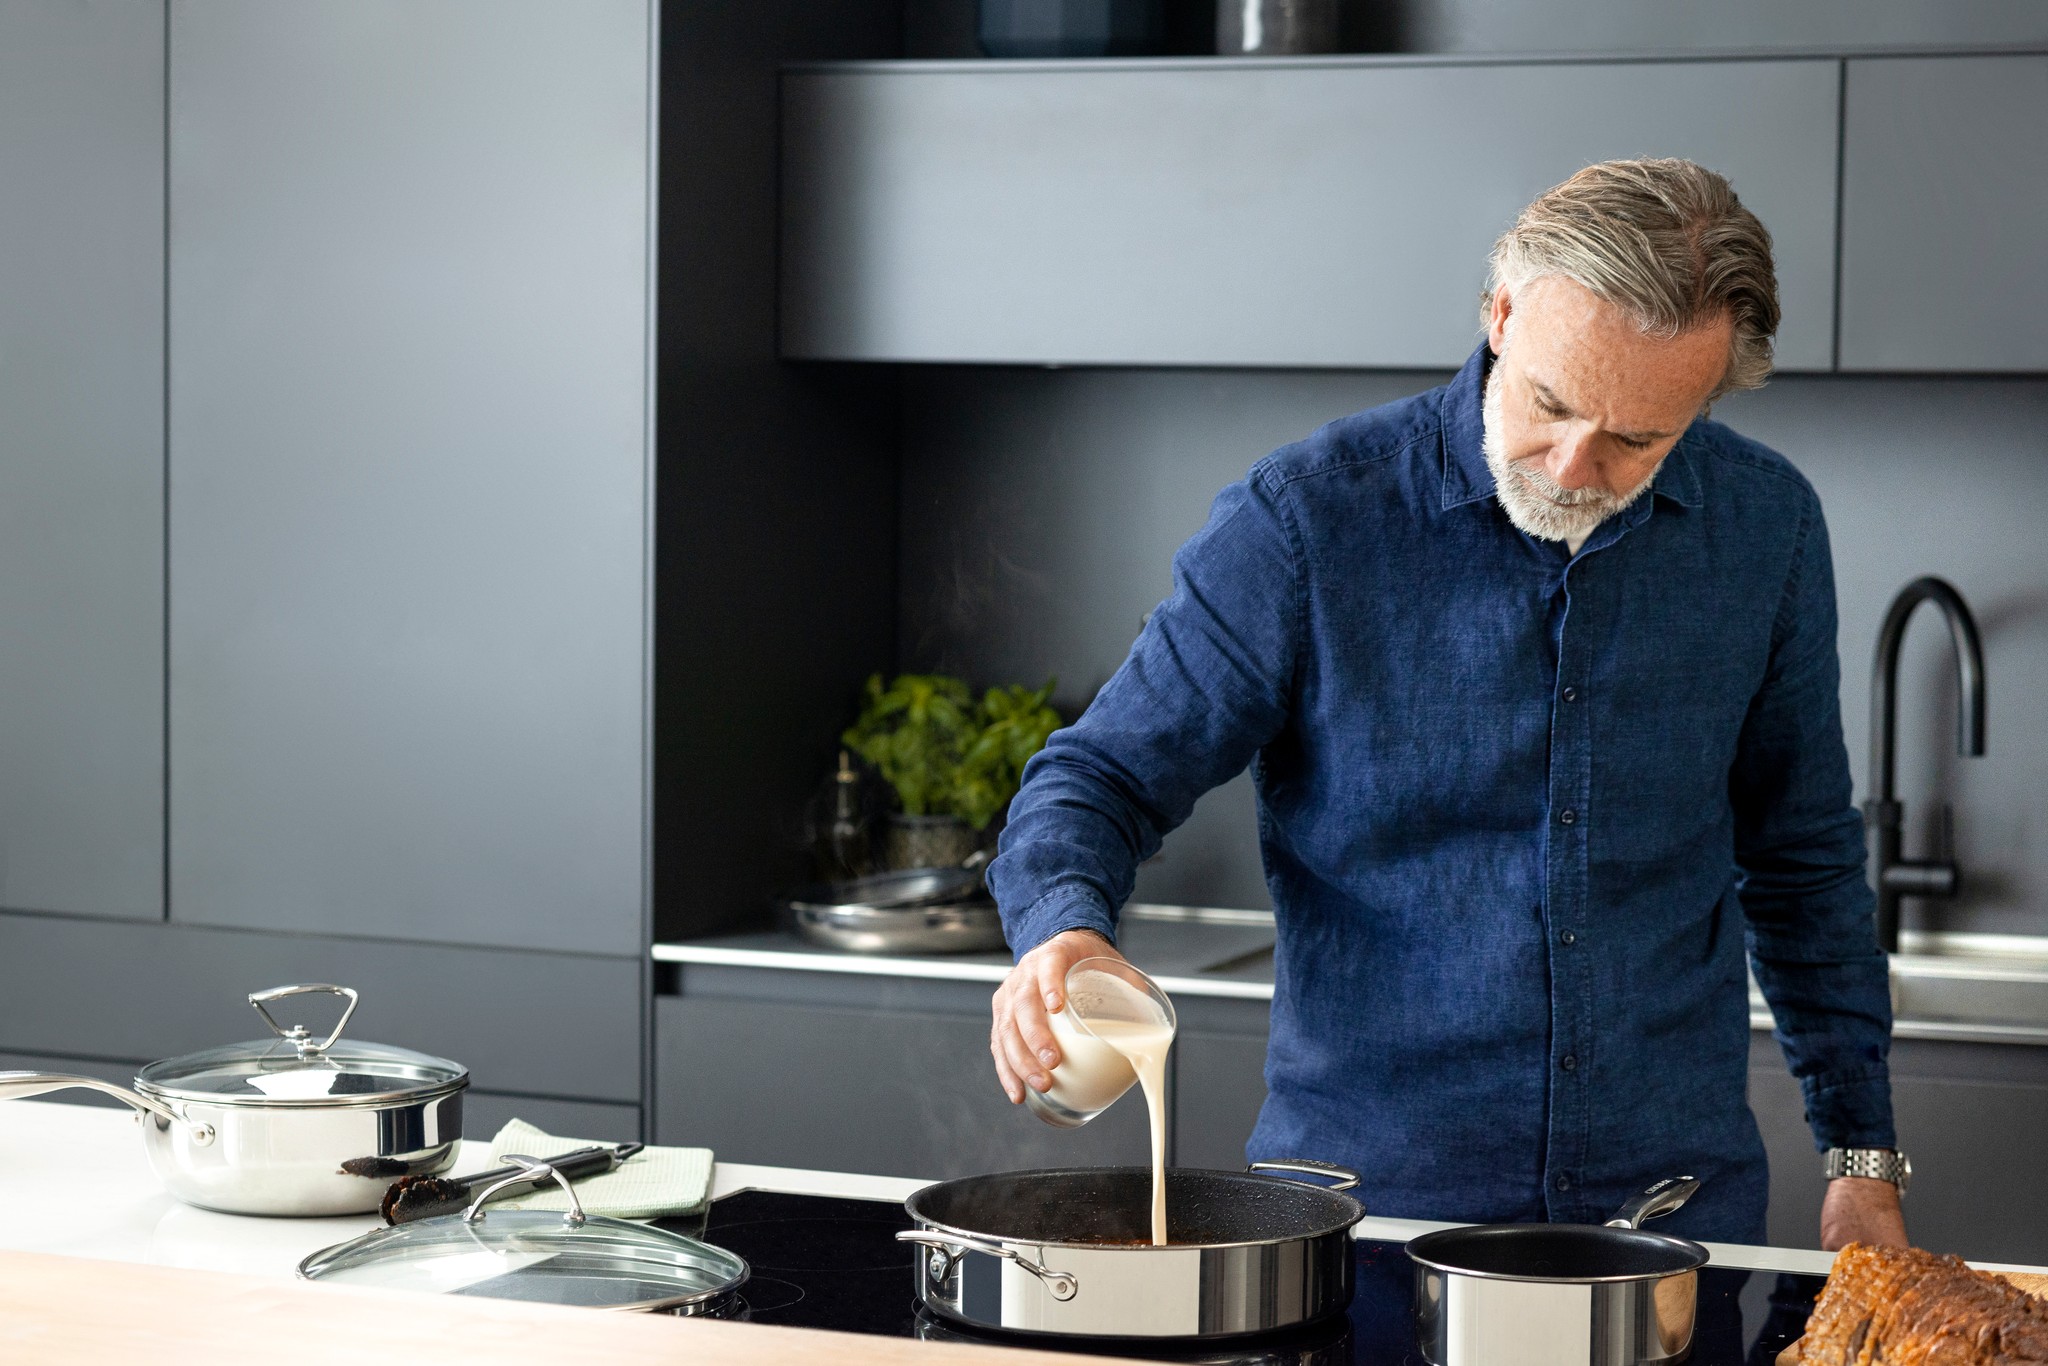 Marcus Wareing pouring cream into a Circulon pan in a domestic kitchen